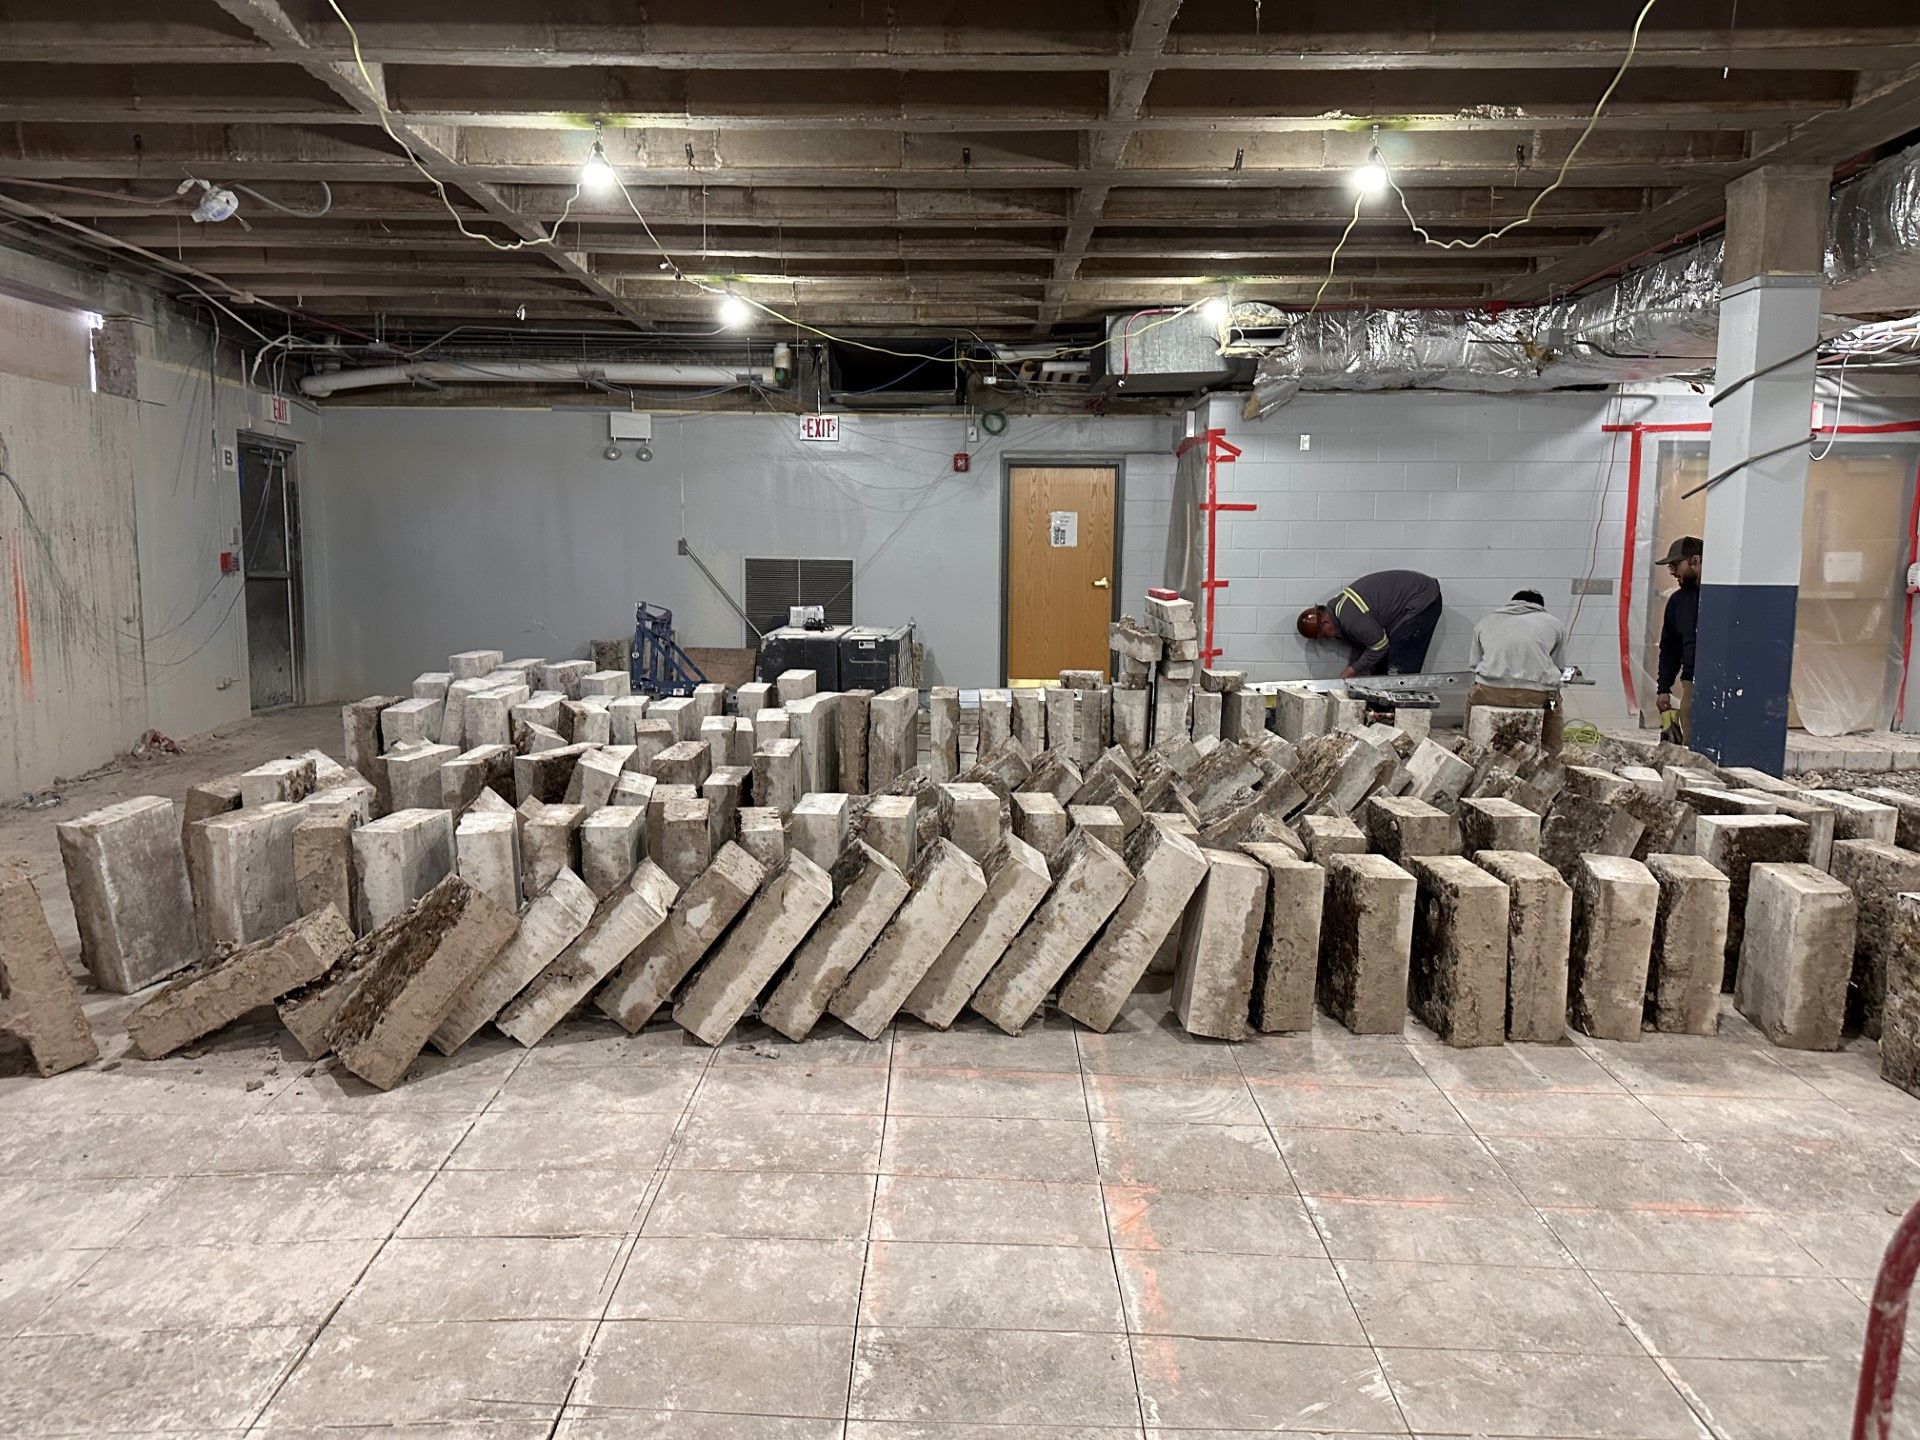 A bunch of concrete blocks are stacked on top of each other in a room.